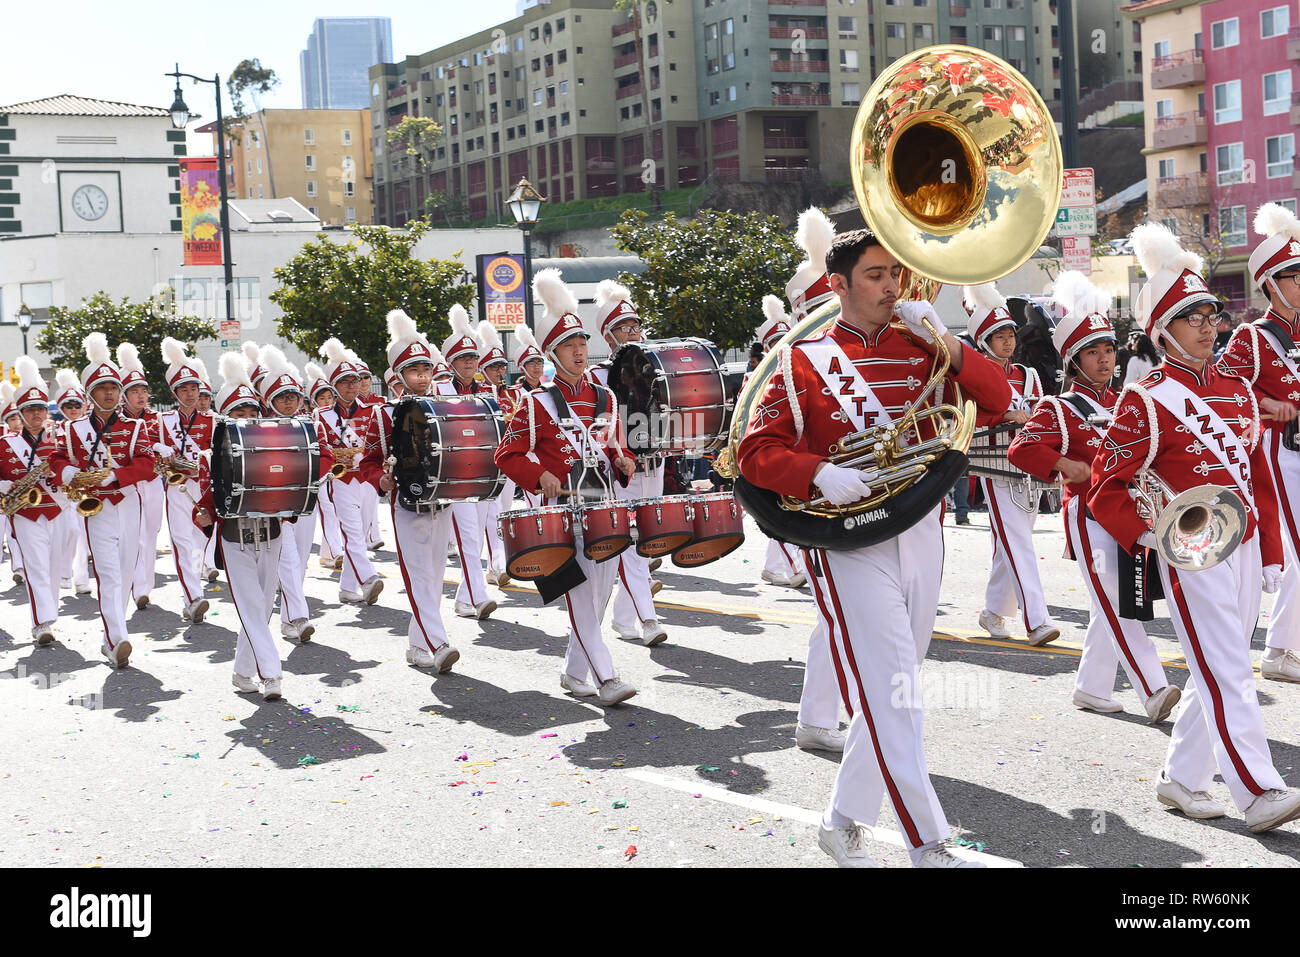 LOS ANGELES - FEBRUARY 9, 2019: Mark Keppel High School Marching Band at the Los Angeles Chinese New Year Parade. Stock Photo